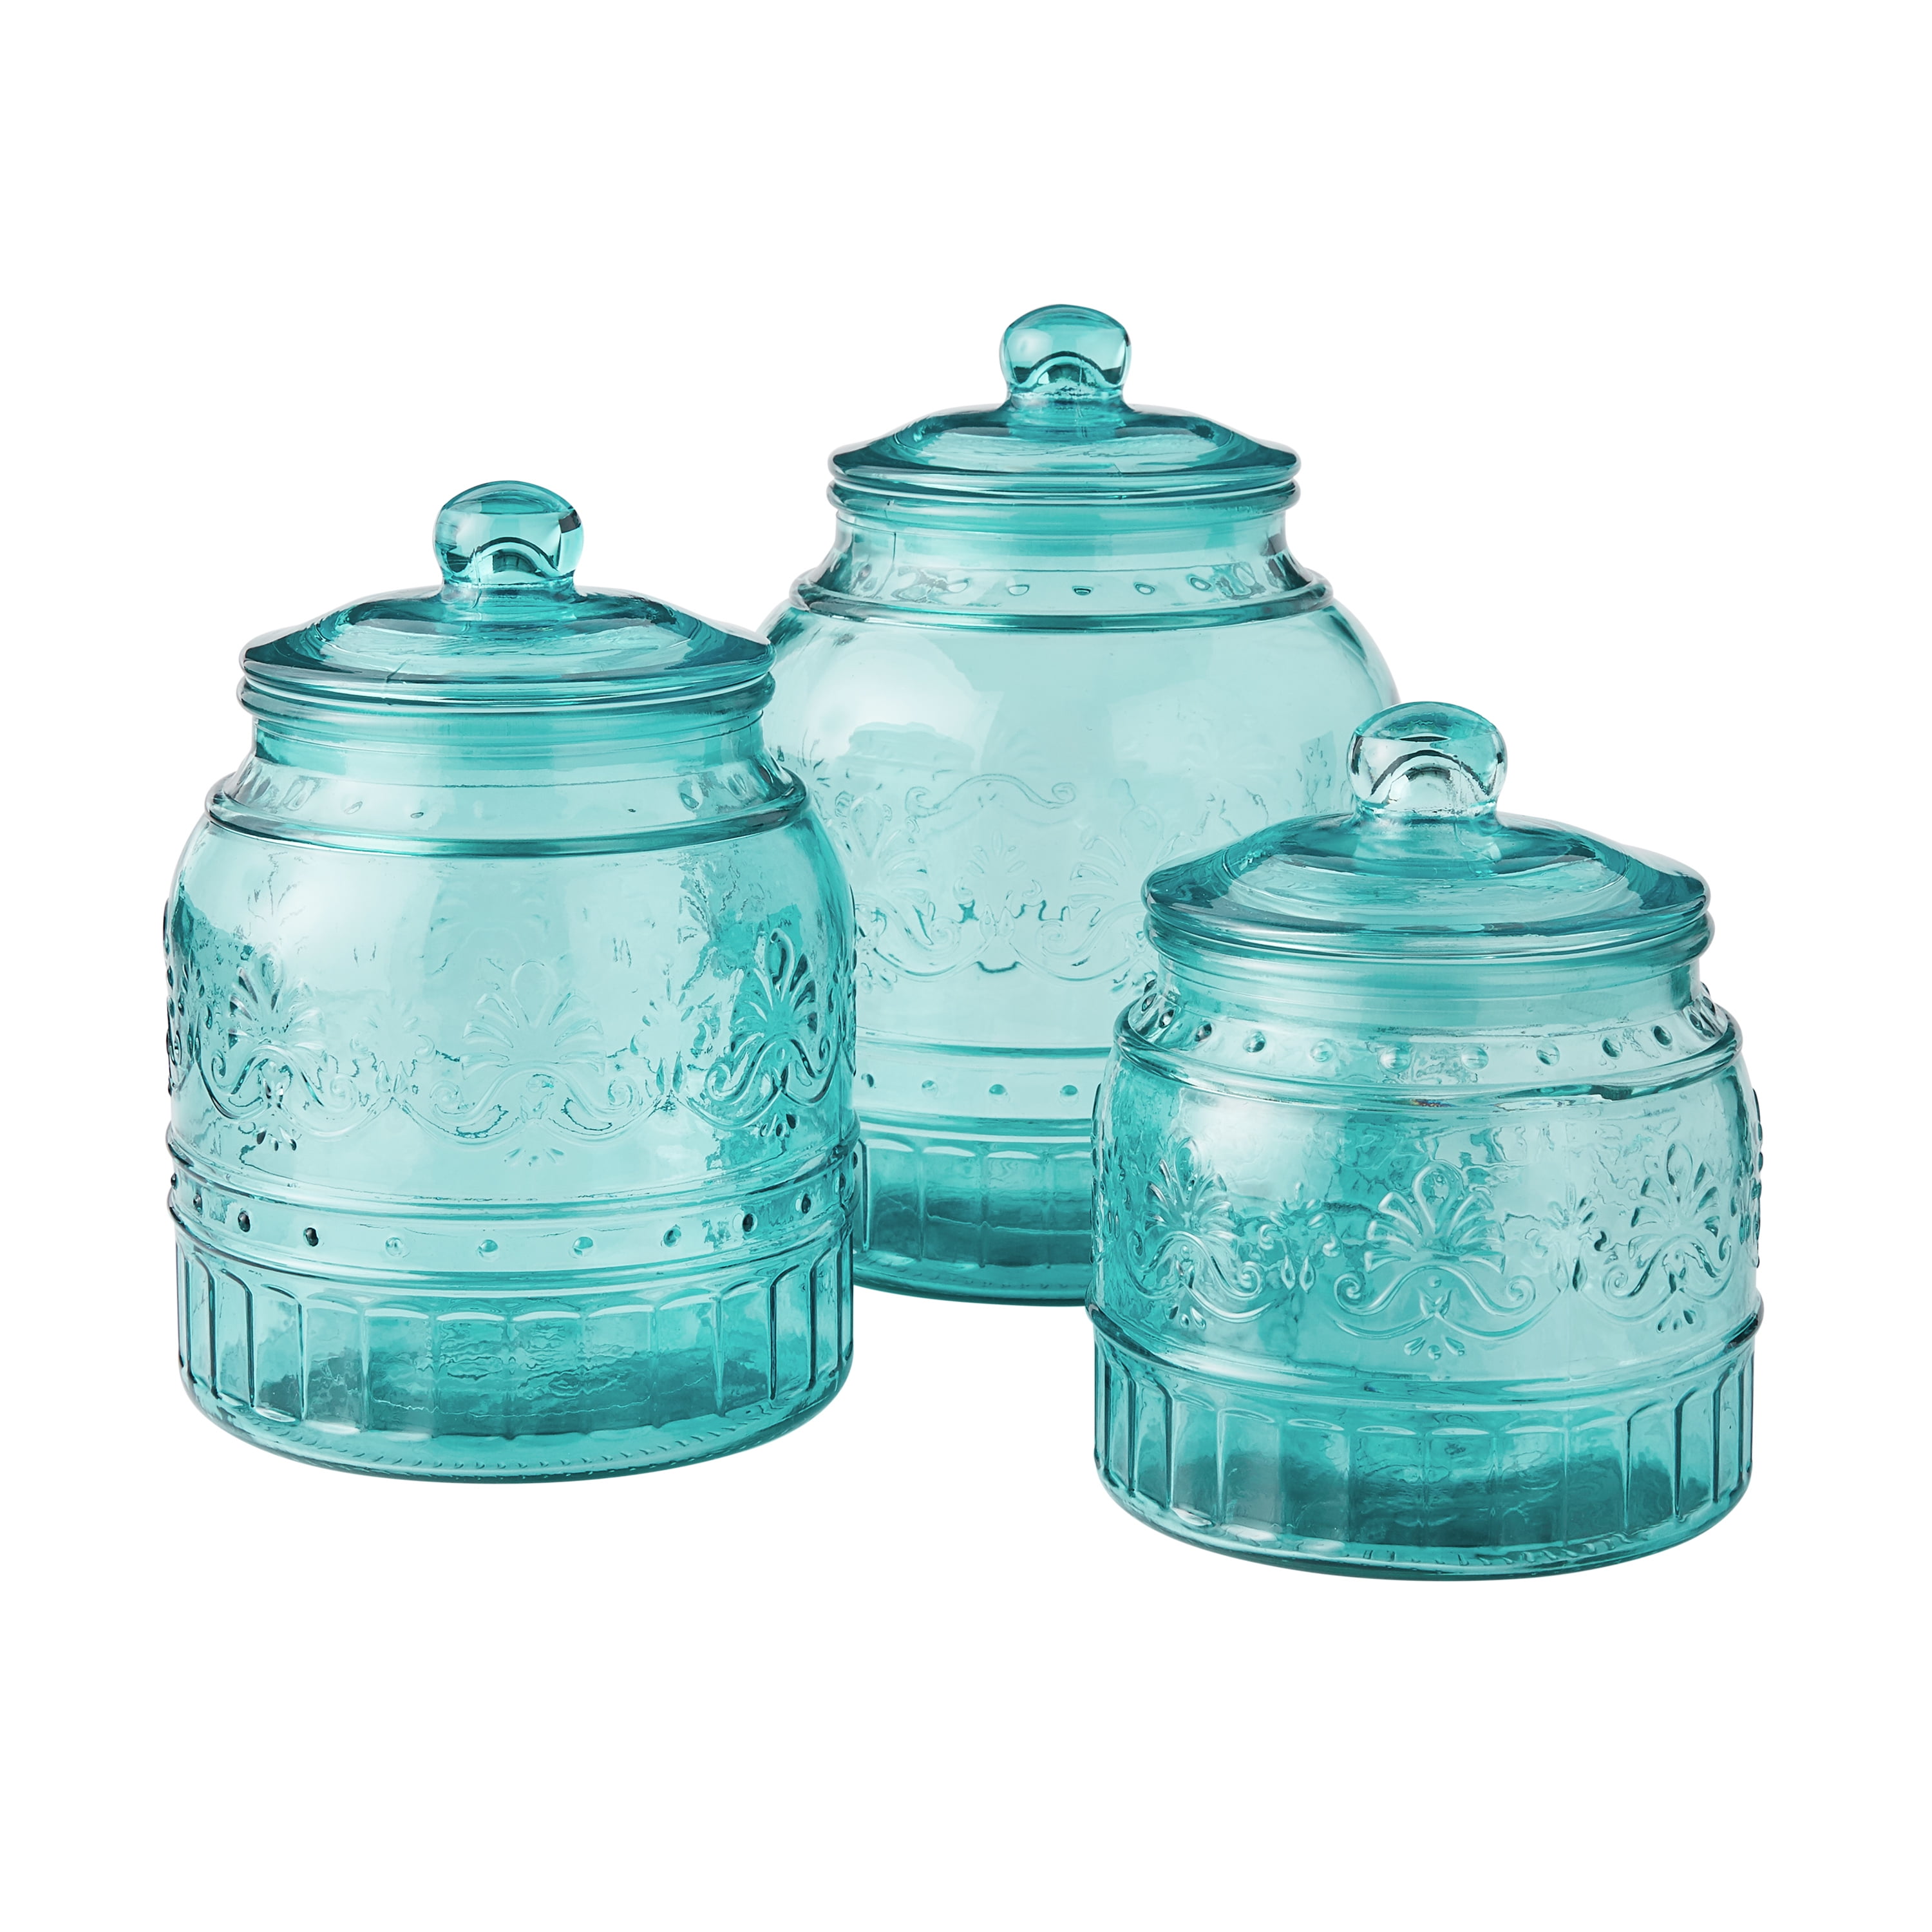 Removable Lid,16 oz Perfect For Your Kitchen Table Or Dining Room Table. Sugar Bowl Very Elegant Sugar Container 